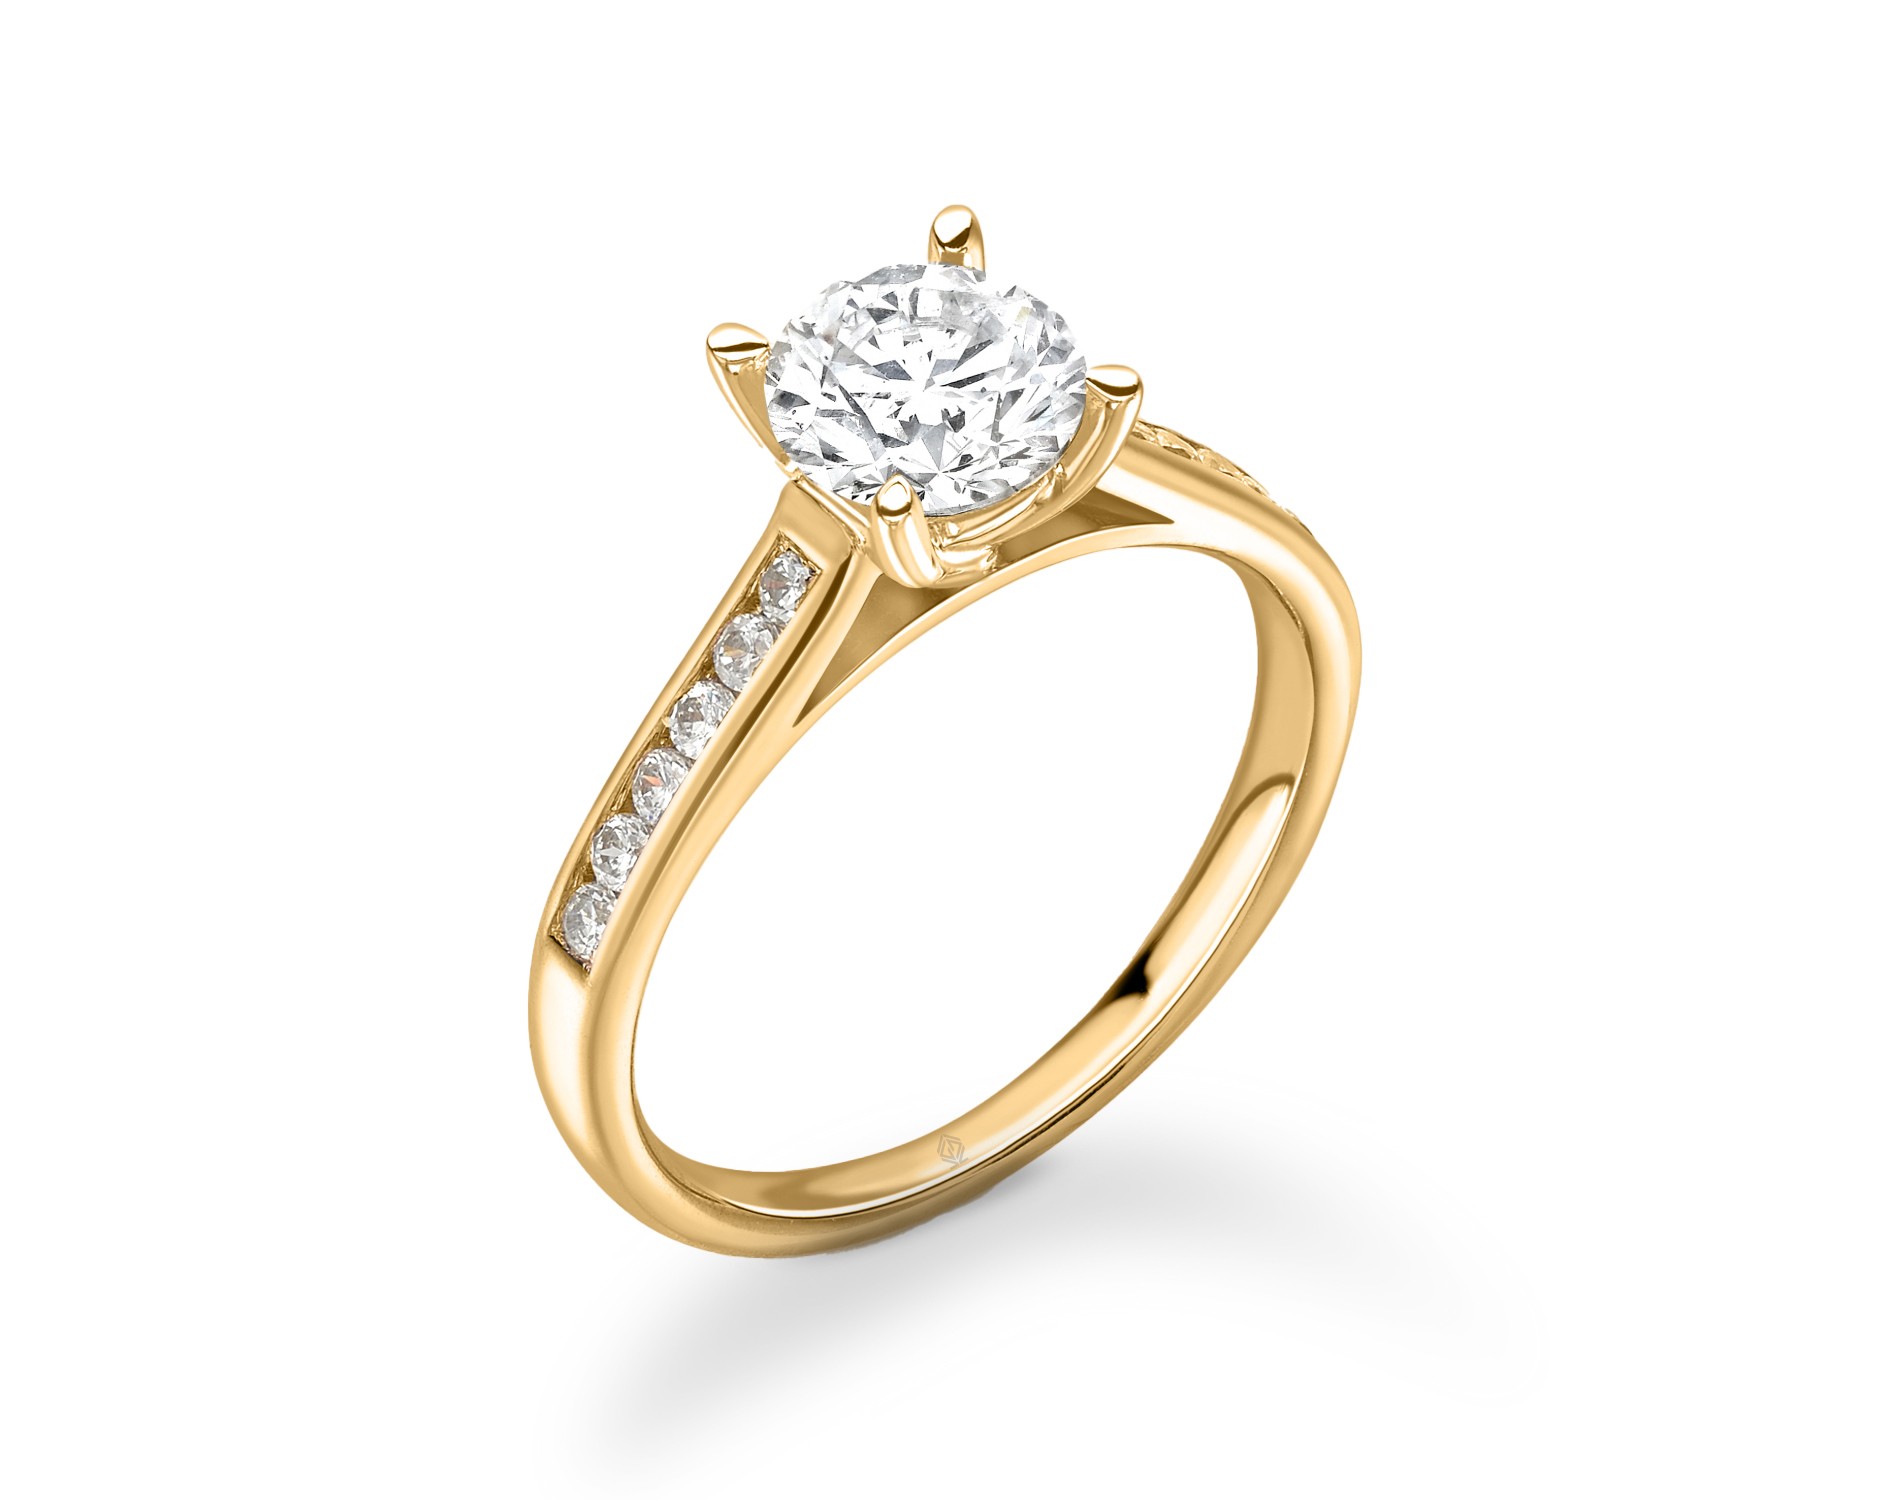 18K YELLOW GOLD 4 PRONGS HEAD DIAMOND ENGAGEMENT RING WITH SIDE STONES CHANNEL SET